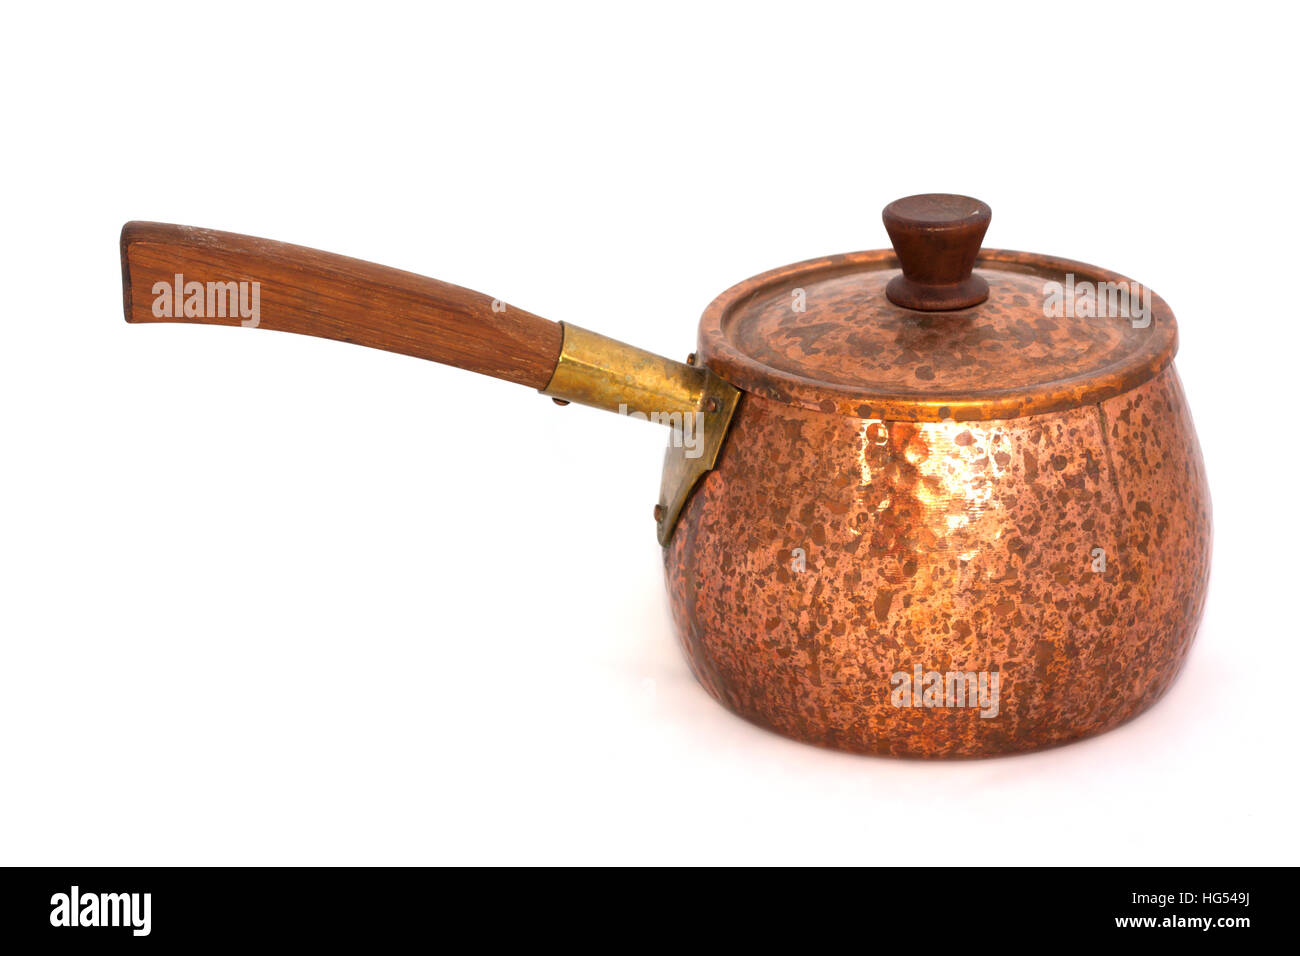 Copper pan with a wooden handle on a white background Stock Photo